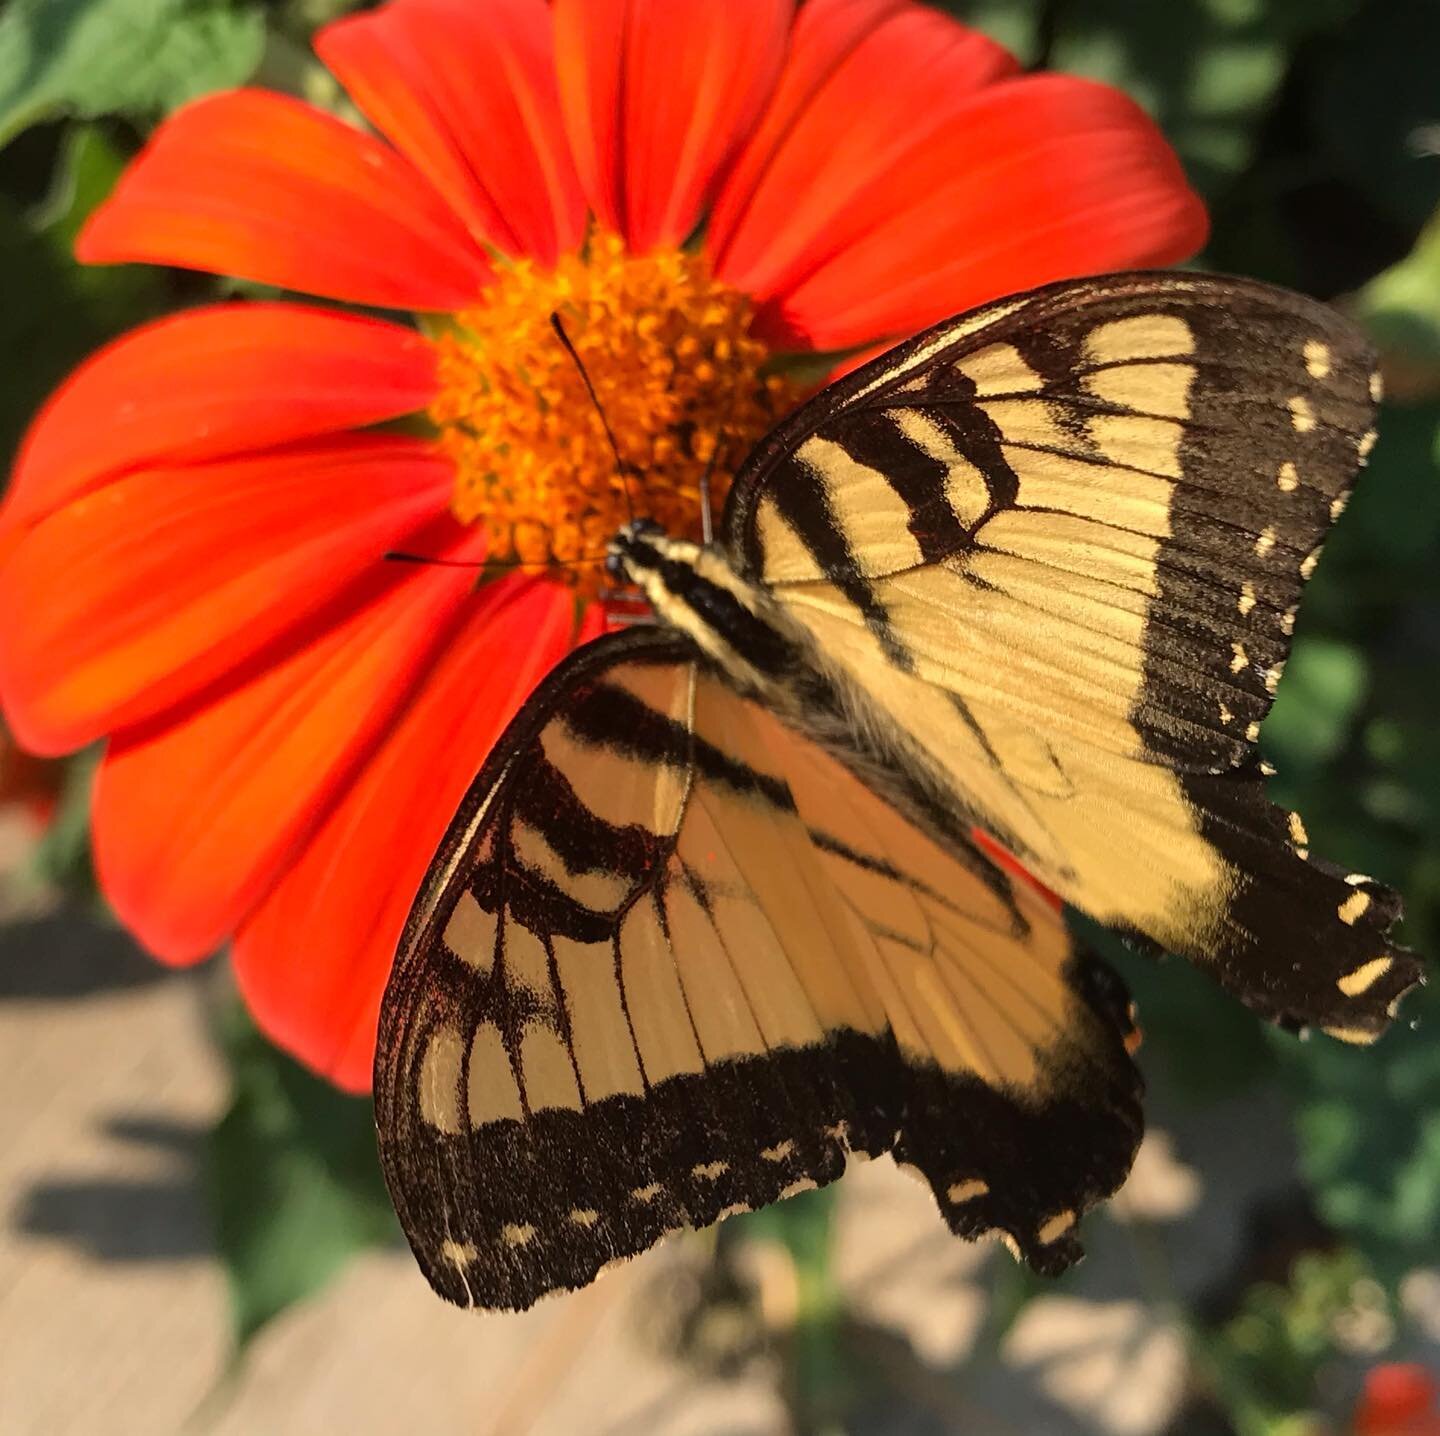 Monarch Butterflies, an endangered species
.
.
.

Monarch butterflies have started descending on our backyard and neighborhood plants. They seem to belong to the family of eastern monarchs which breed in Canada and the Great Plains and winter in Cent